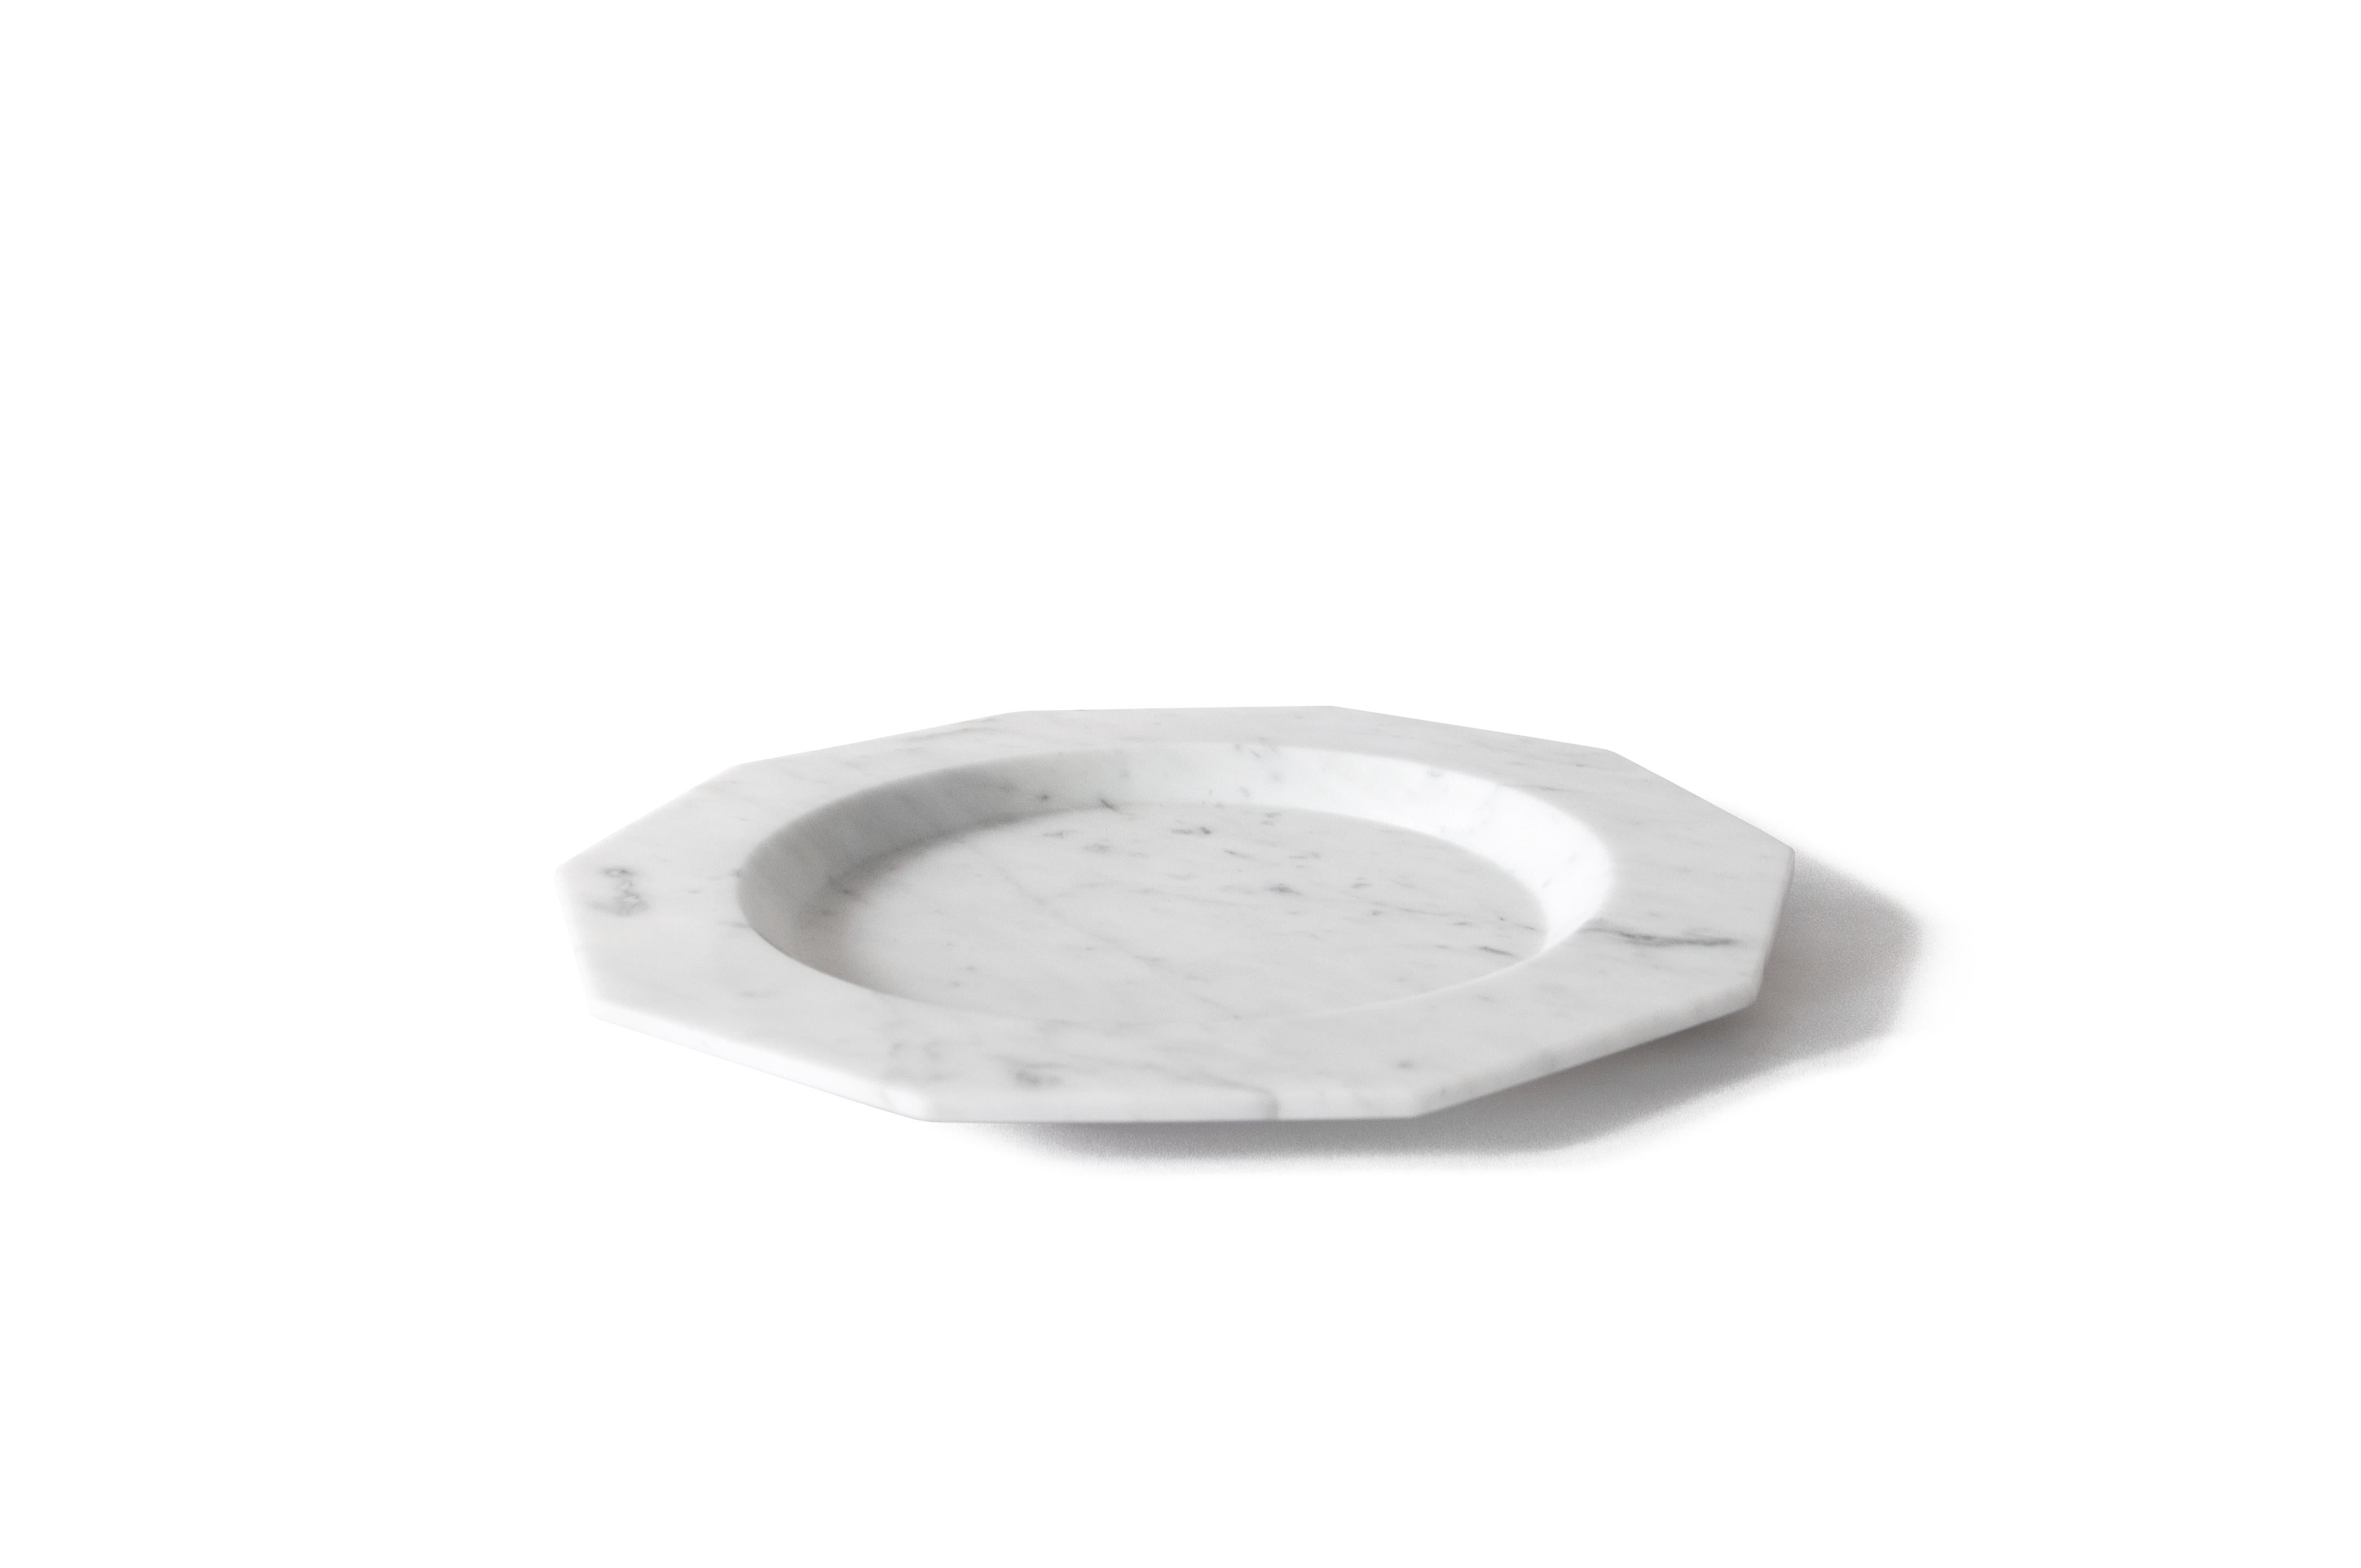 Soup plate in satin white Carrara marble.

Available also in black Marquina marble.

Each piece is in a way unique (every marble block is different in veins and shades) and handmade by Italian artisans specialized over generations in processing